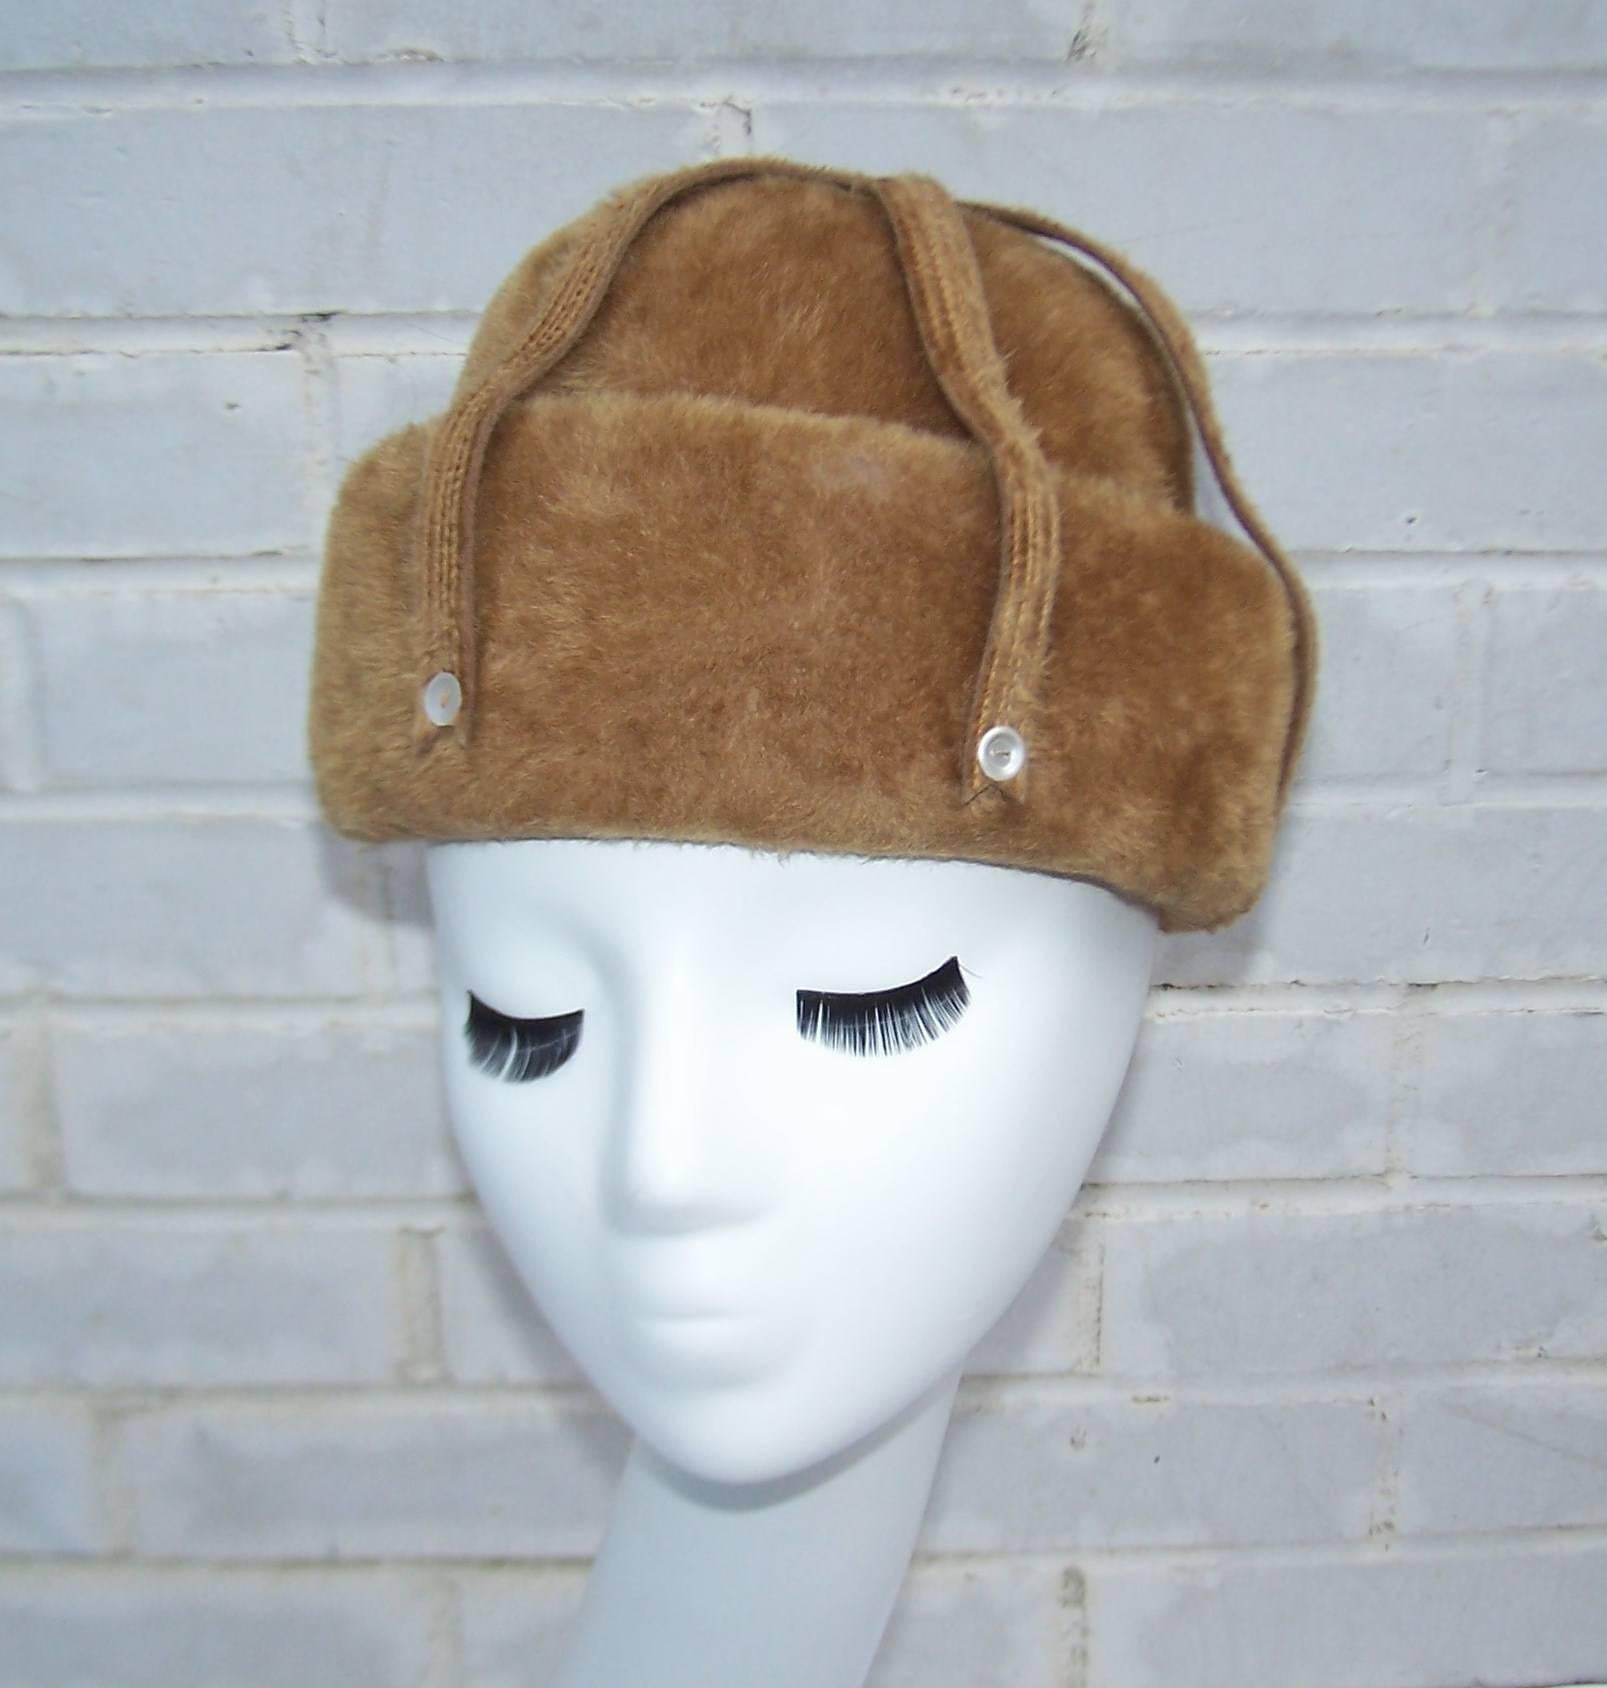 What a cutie!  This ultra soft wool hat by Hattie Carnegie, the lady that could dress you from 'hat to hem',  has the feel of sheared fur in a neutral caramel color that pairs well with browns, grays, blues, greens...you name it!  The whimsical